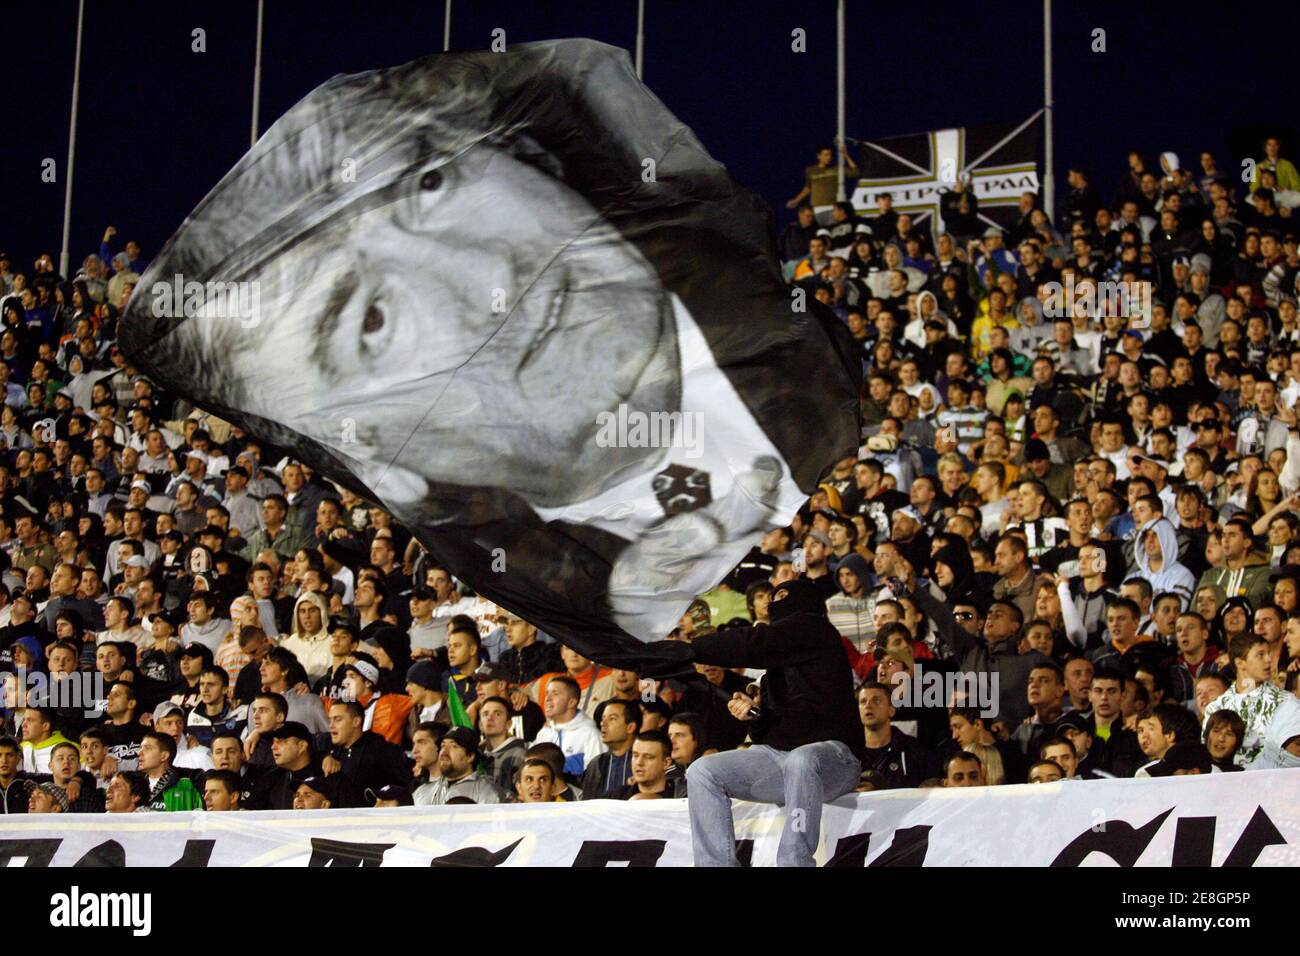 Supporters of Partizan Belgrade wave a flag with Radovan Karadzic's picture during a friendly soccer match against Olympique Lyonnais in Belgrade July 23,2008.   REUTERS/Ivan Milutinovic (SERBIA)  FOR BEST QUALITY ALSO SEE: GF2E4CG0H0401 Stock Photo